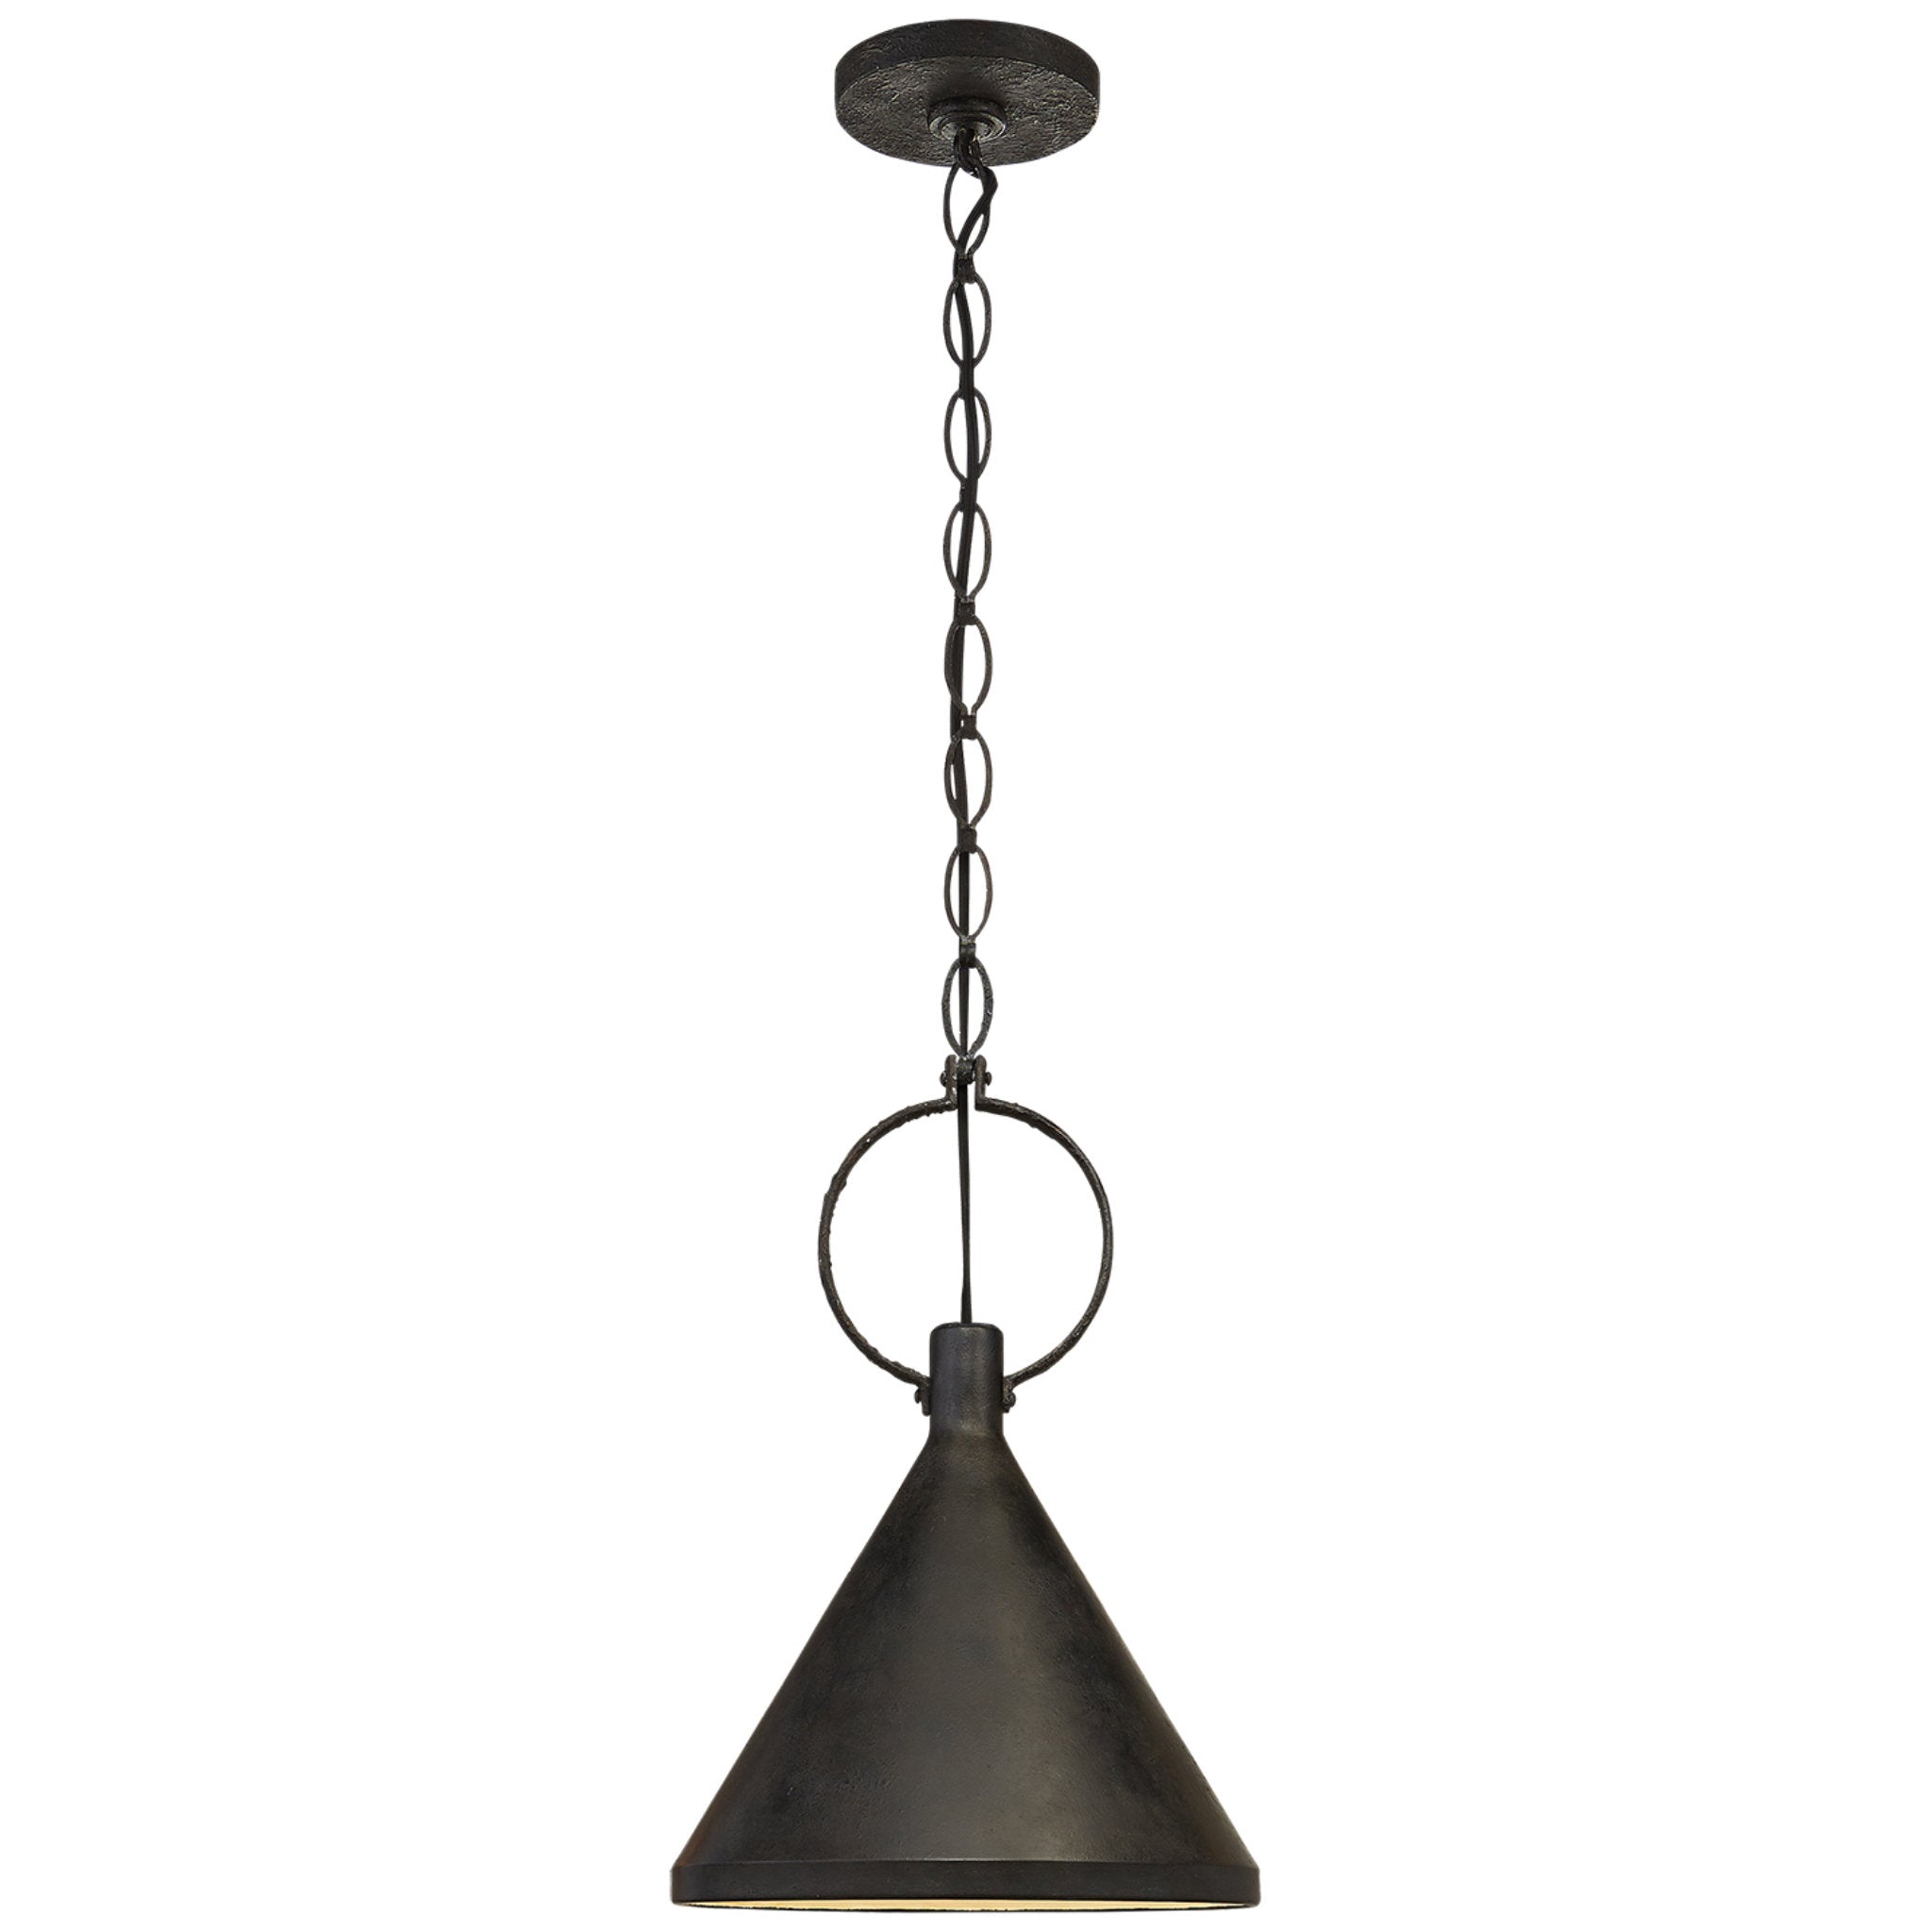 Suzanne Kasler Limoges Medium Pendant in Natural Rust with Aged Iron Shade